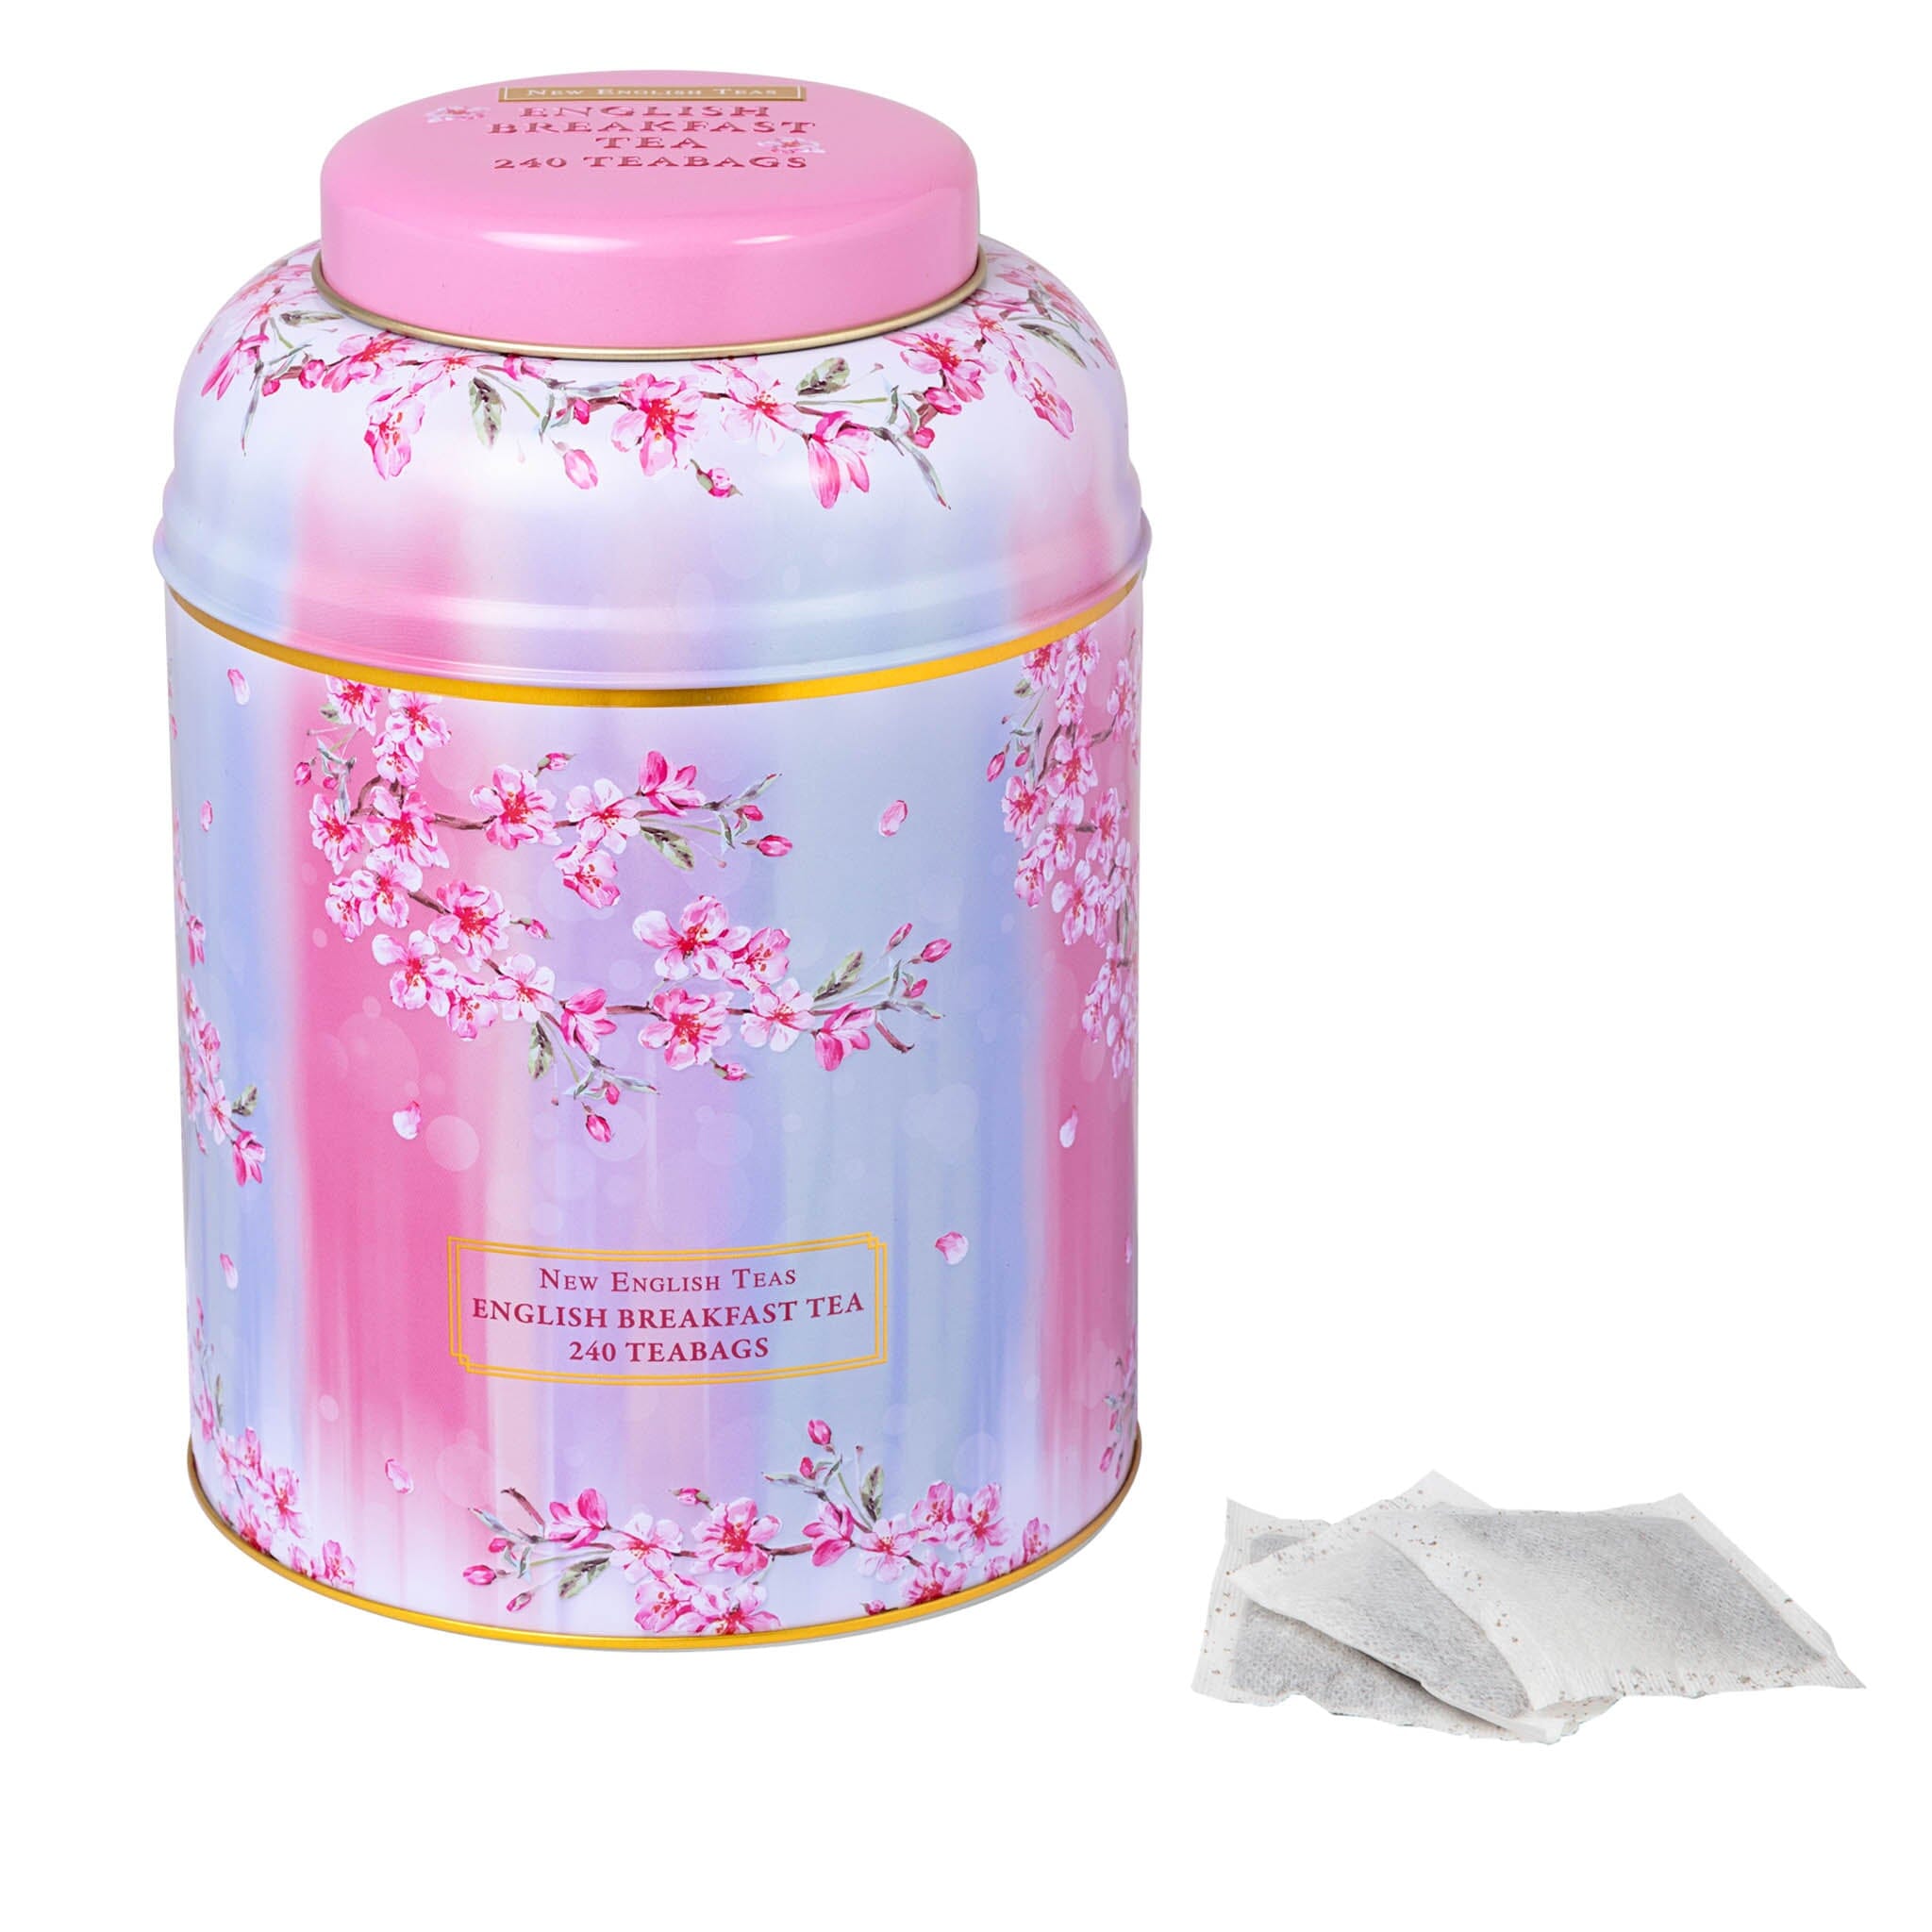 Cherry Blossom Water Colour Large Tea Caddy with 240 English Breakfast Teabags Tea Tins New English Teas 